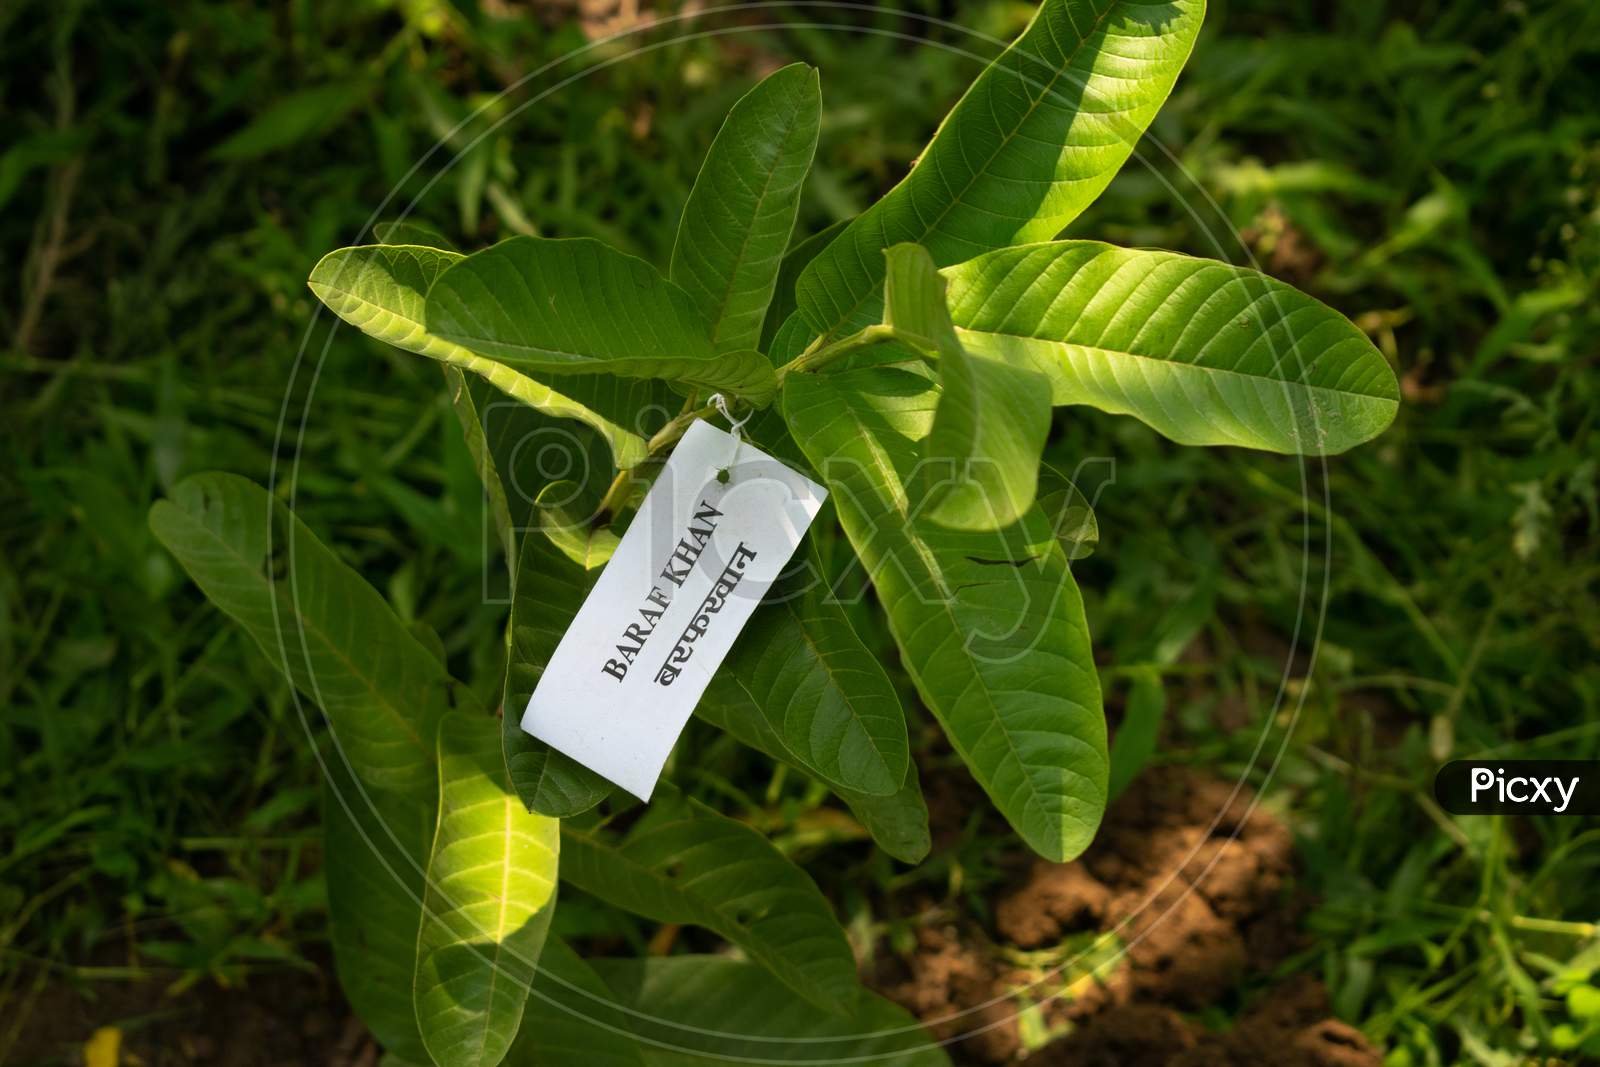 A tag of local plant nursery attached to guava plants ready for plantation